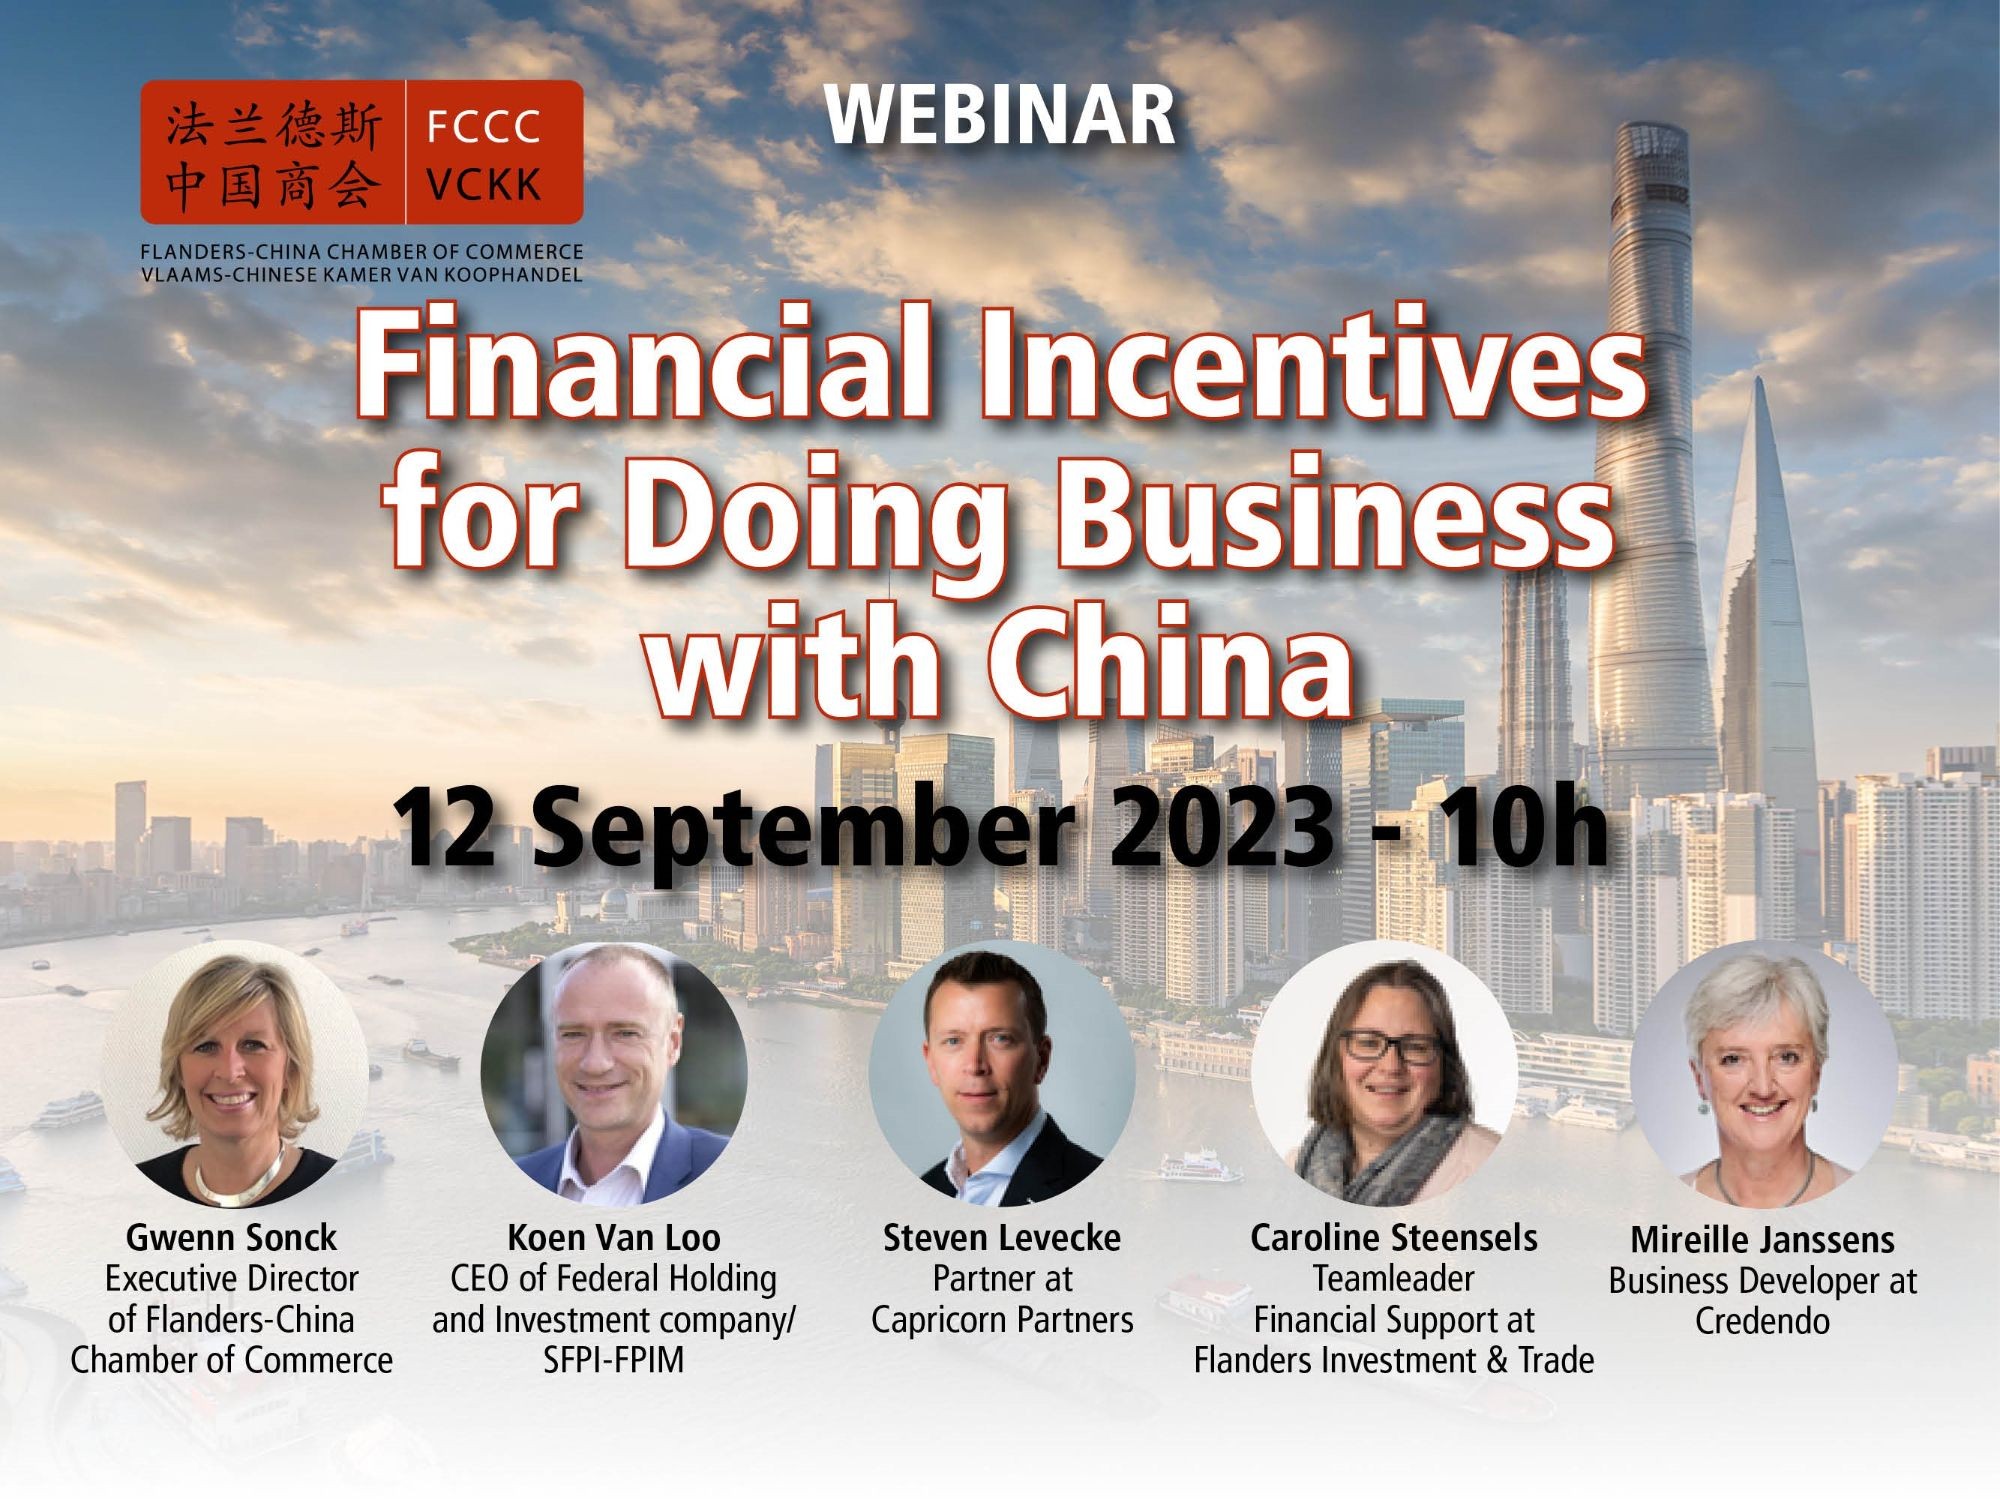 Webinar: Financial Incentives for doing business with China - 12 September 2023 - 10h